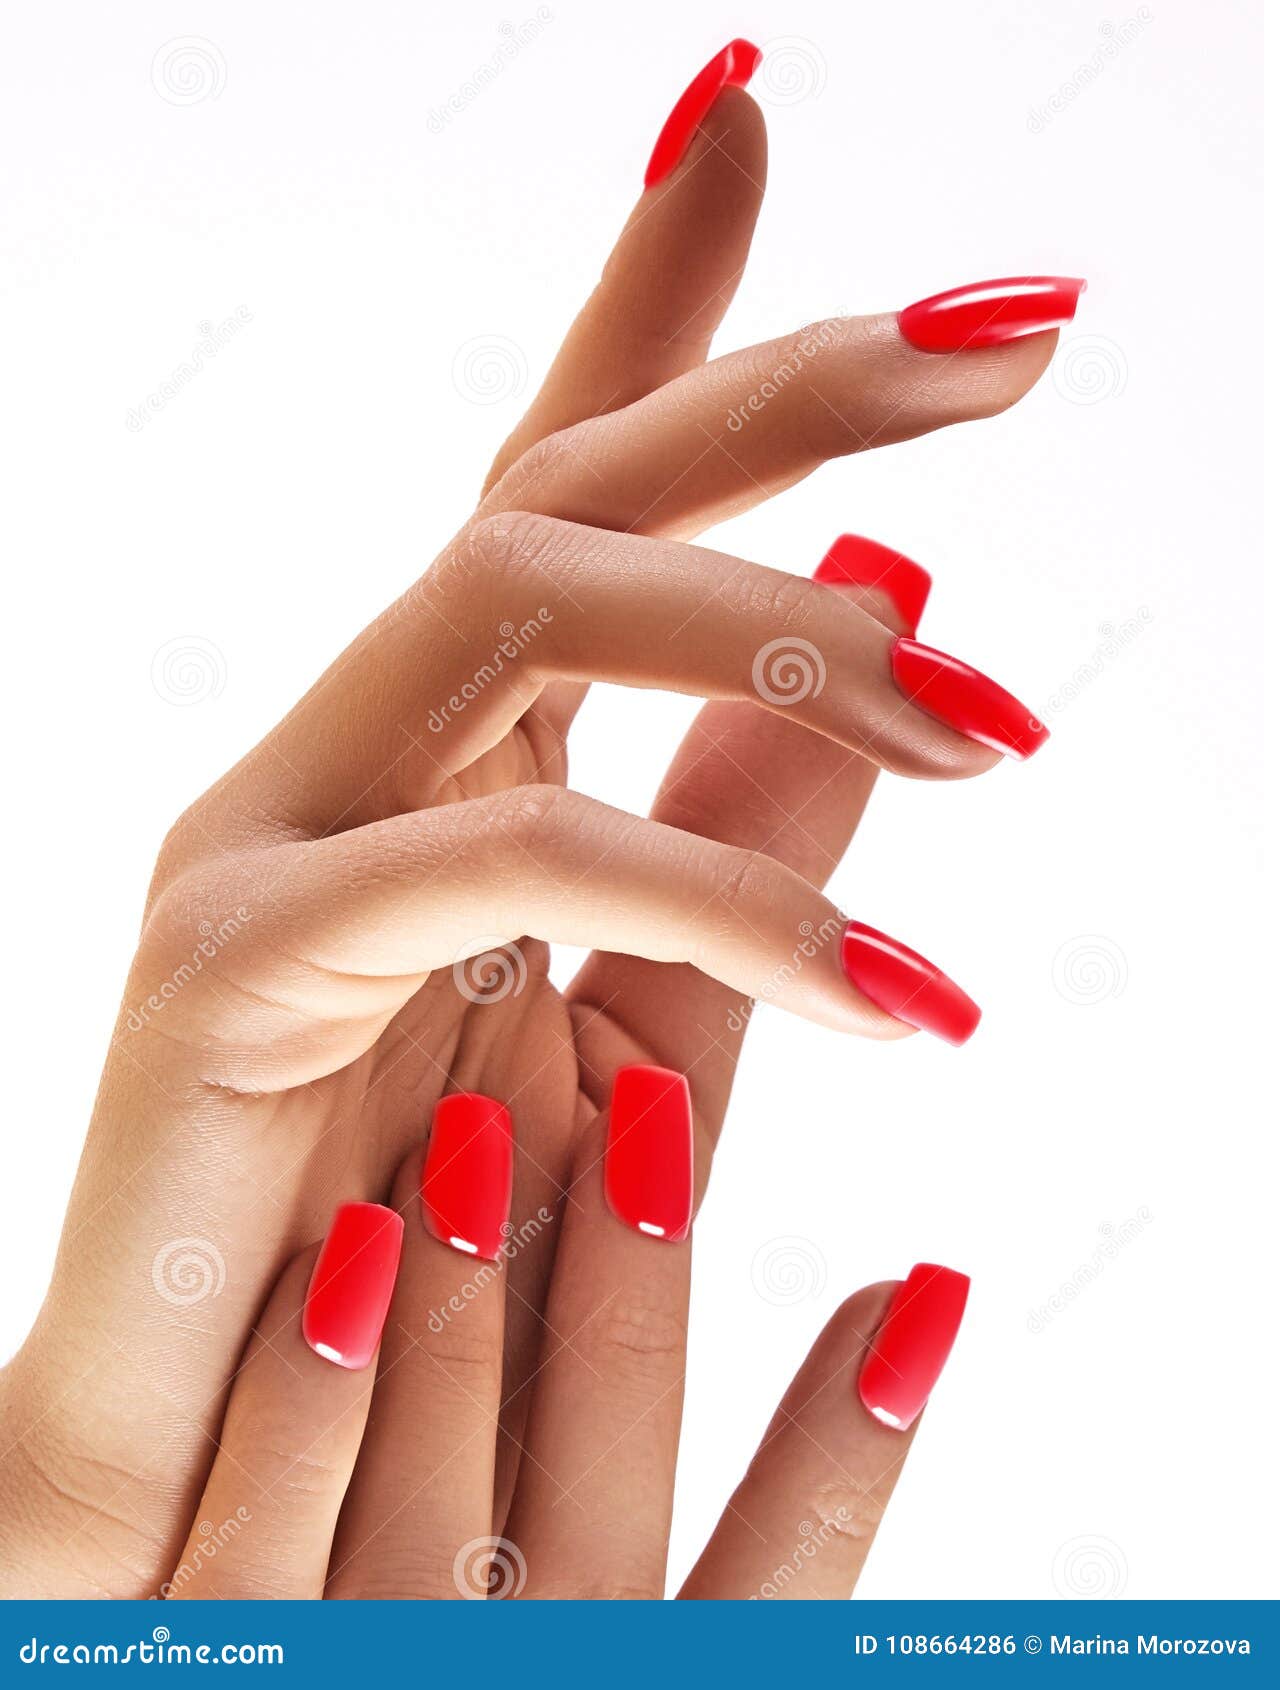 beautiful woman`s hands on light background. care about hand. redl manicure, clean skin. bright nails with polish